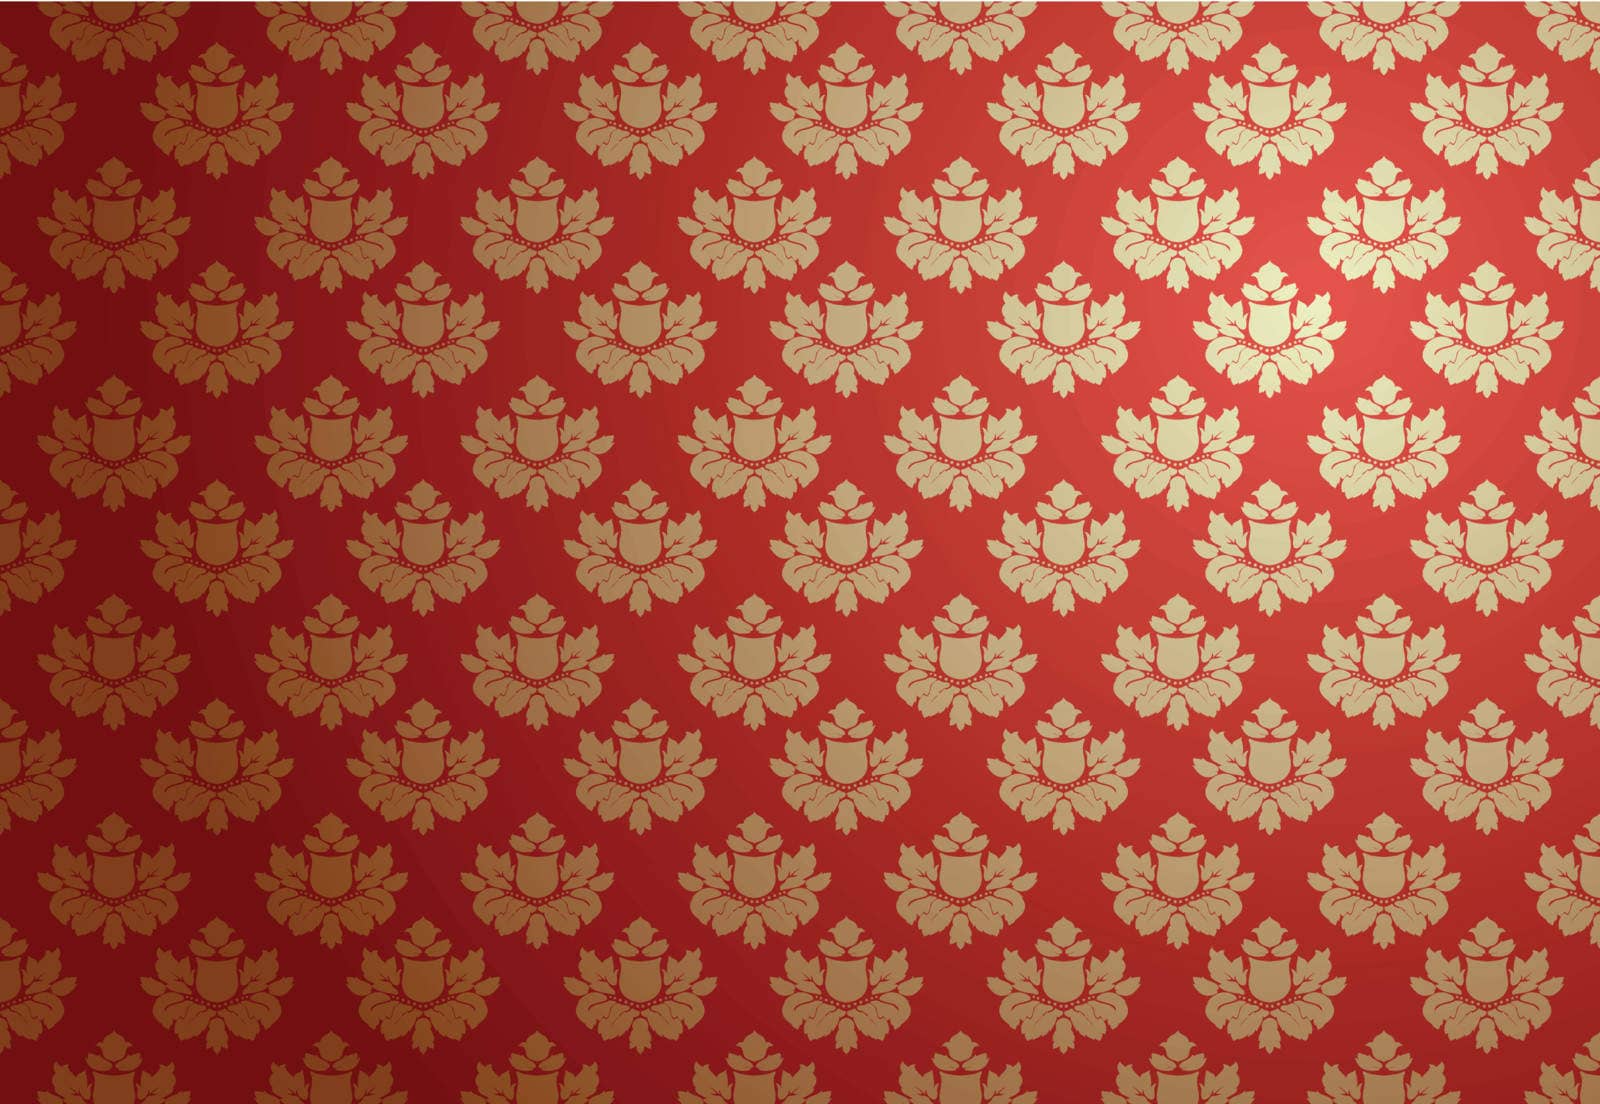 Vector illustration of a red glamour pattern